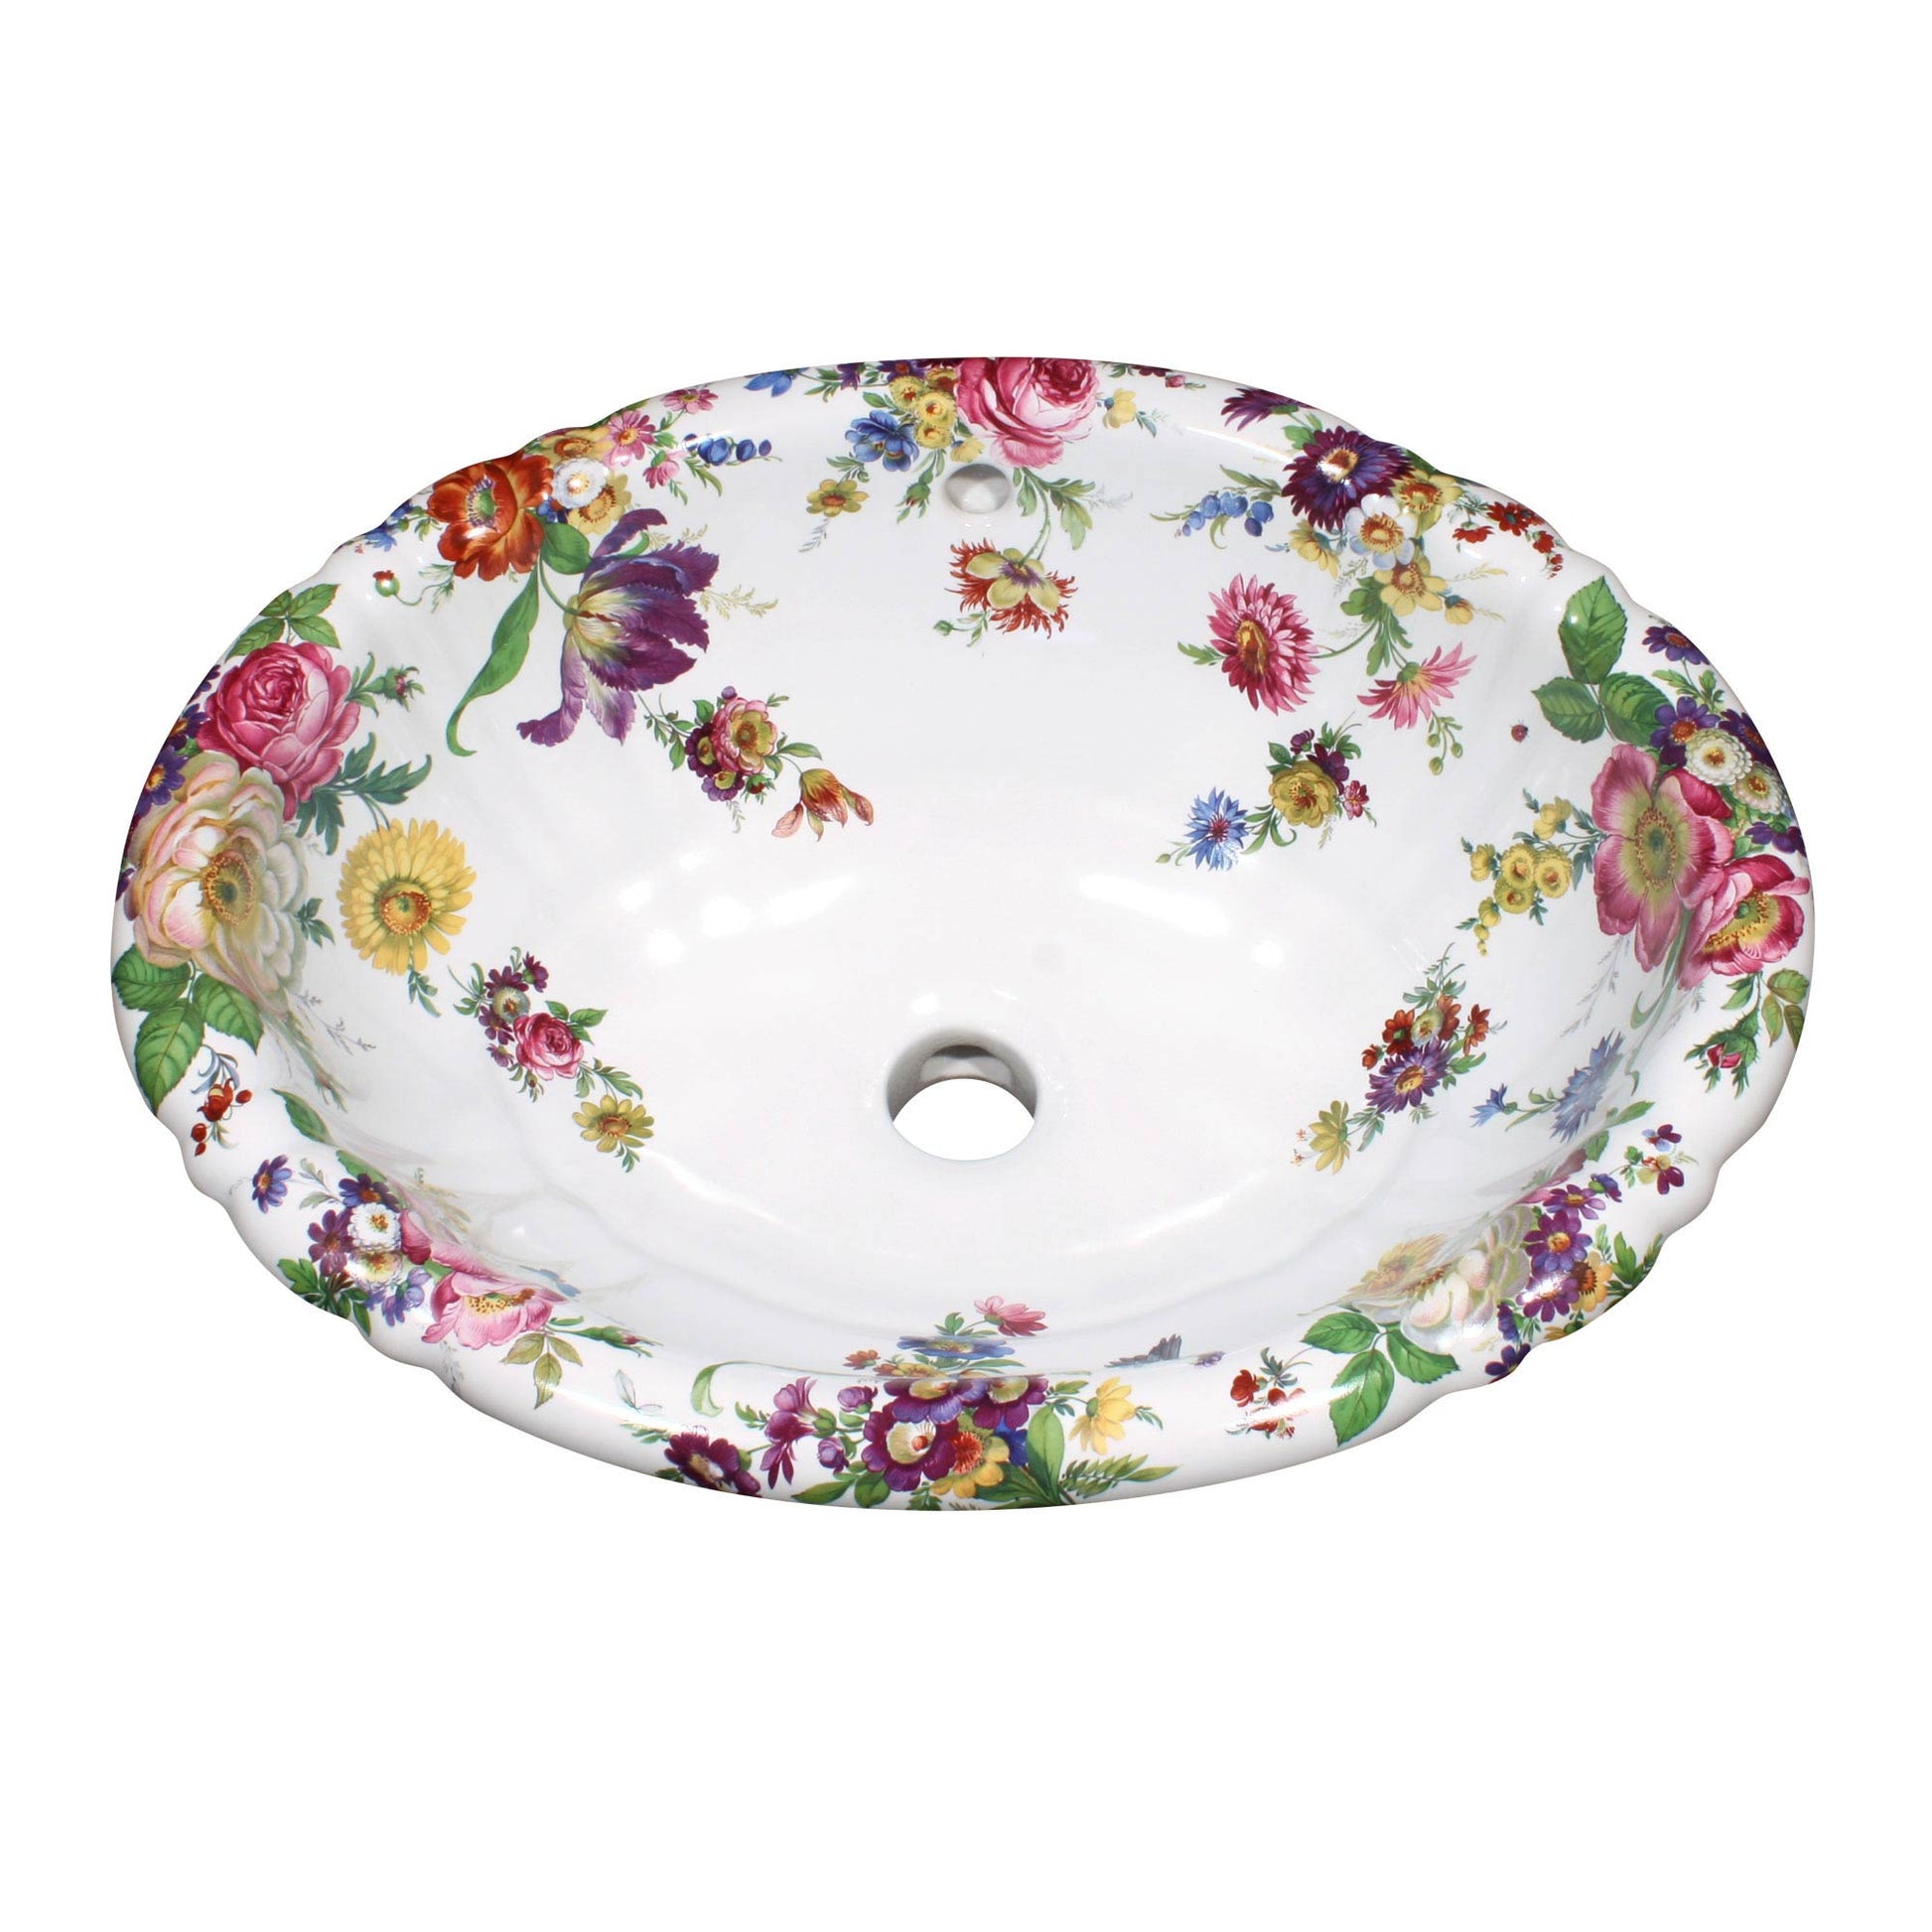 back view of scented garden and flowers ceramic painted sink